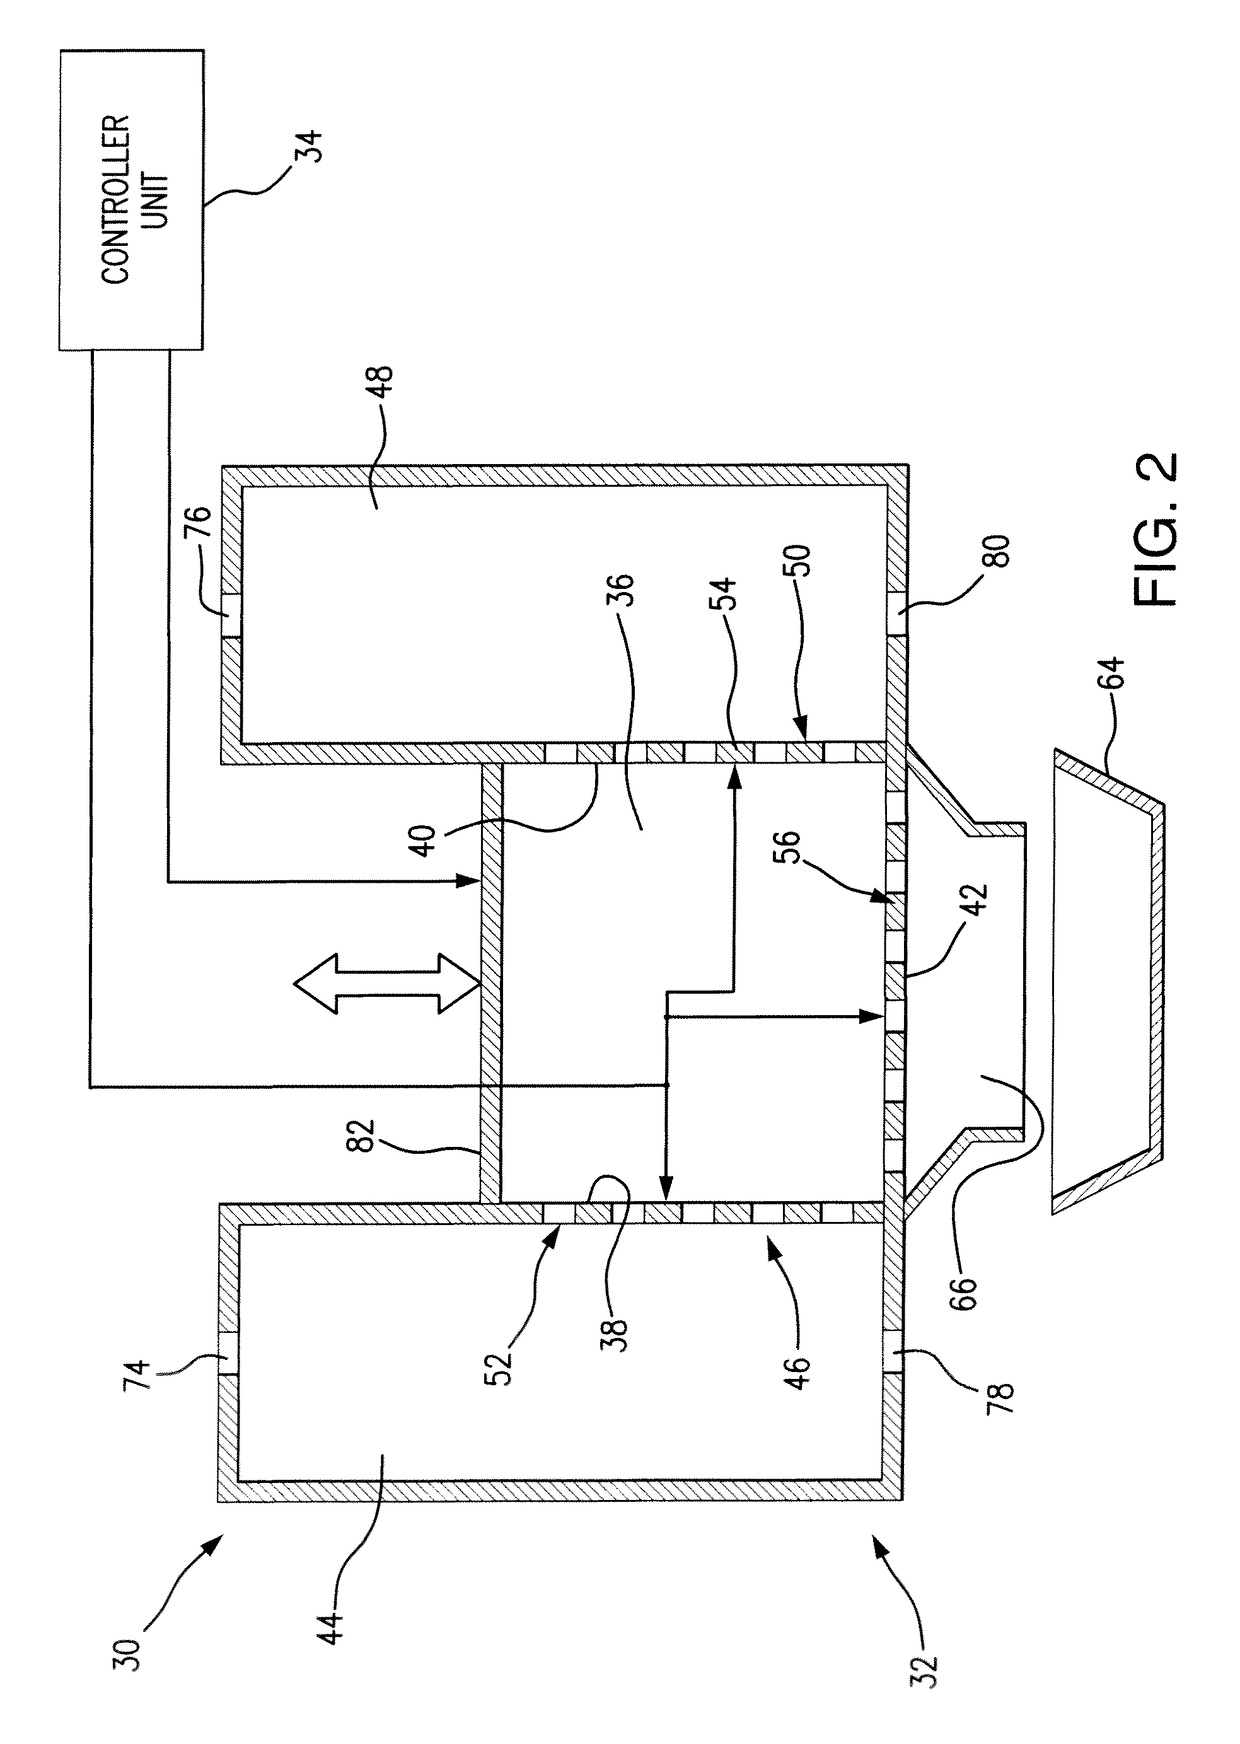 Method and apparatus for partial desalination of a concentrated salt solution